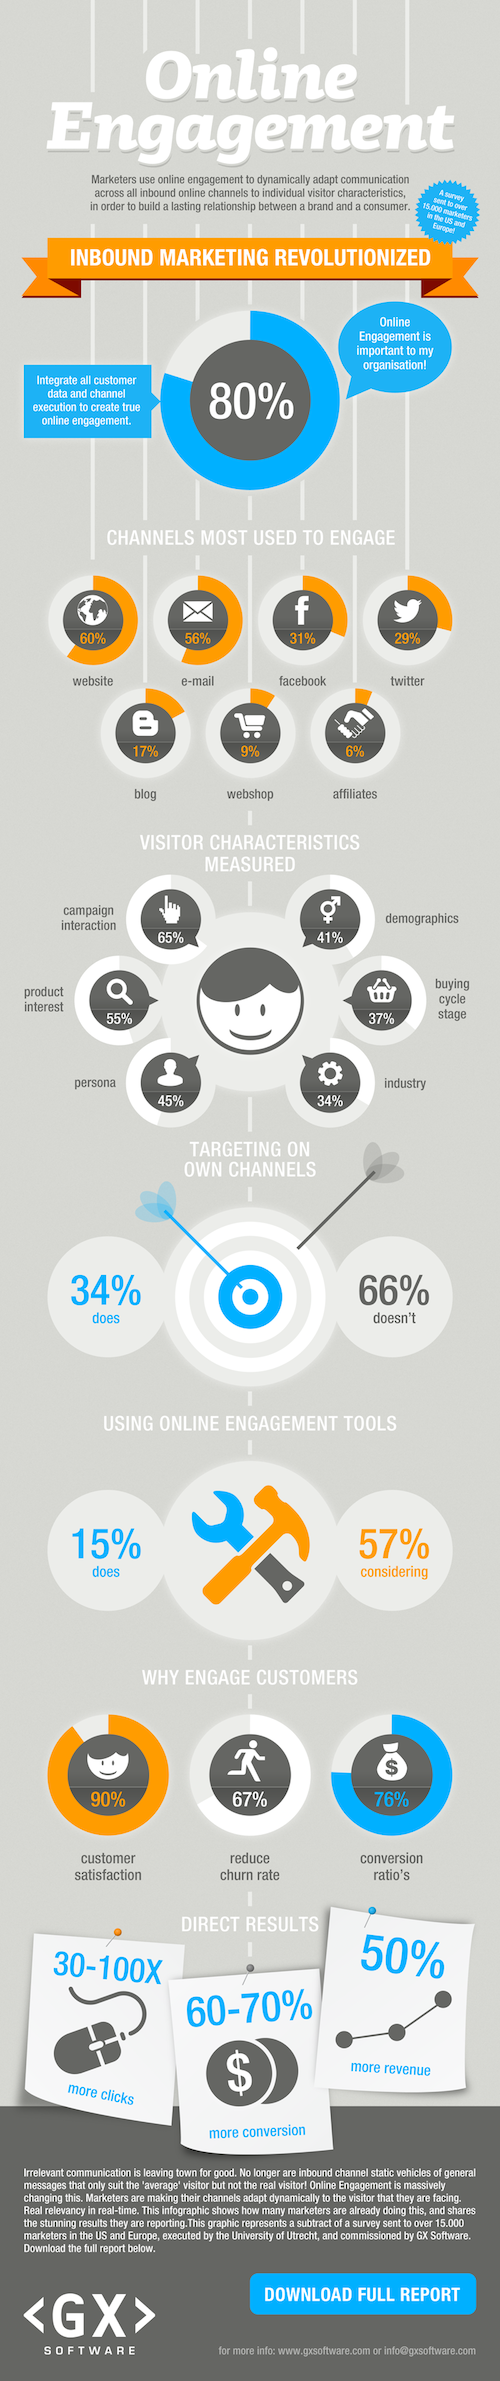 Infographic online engagement anno 2012